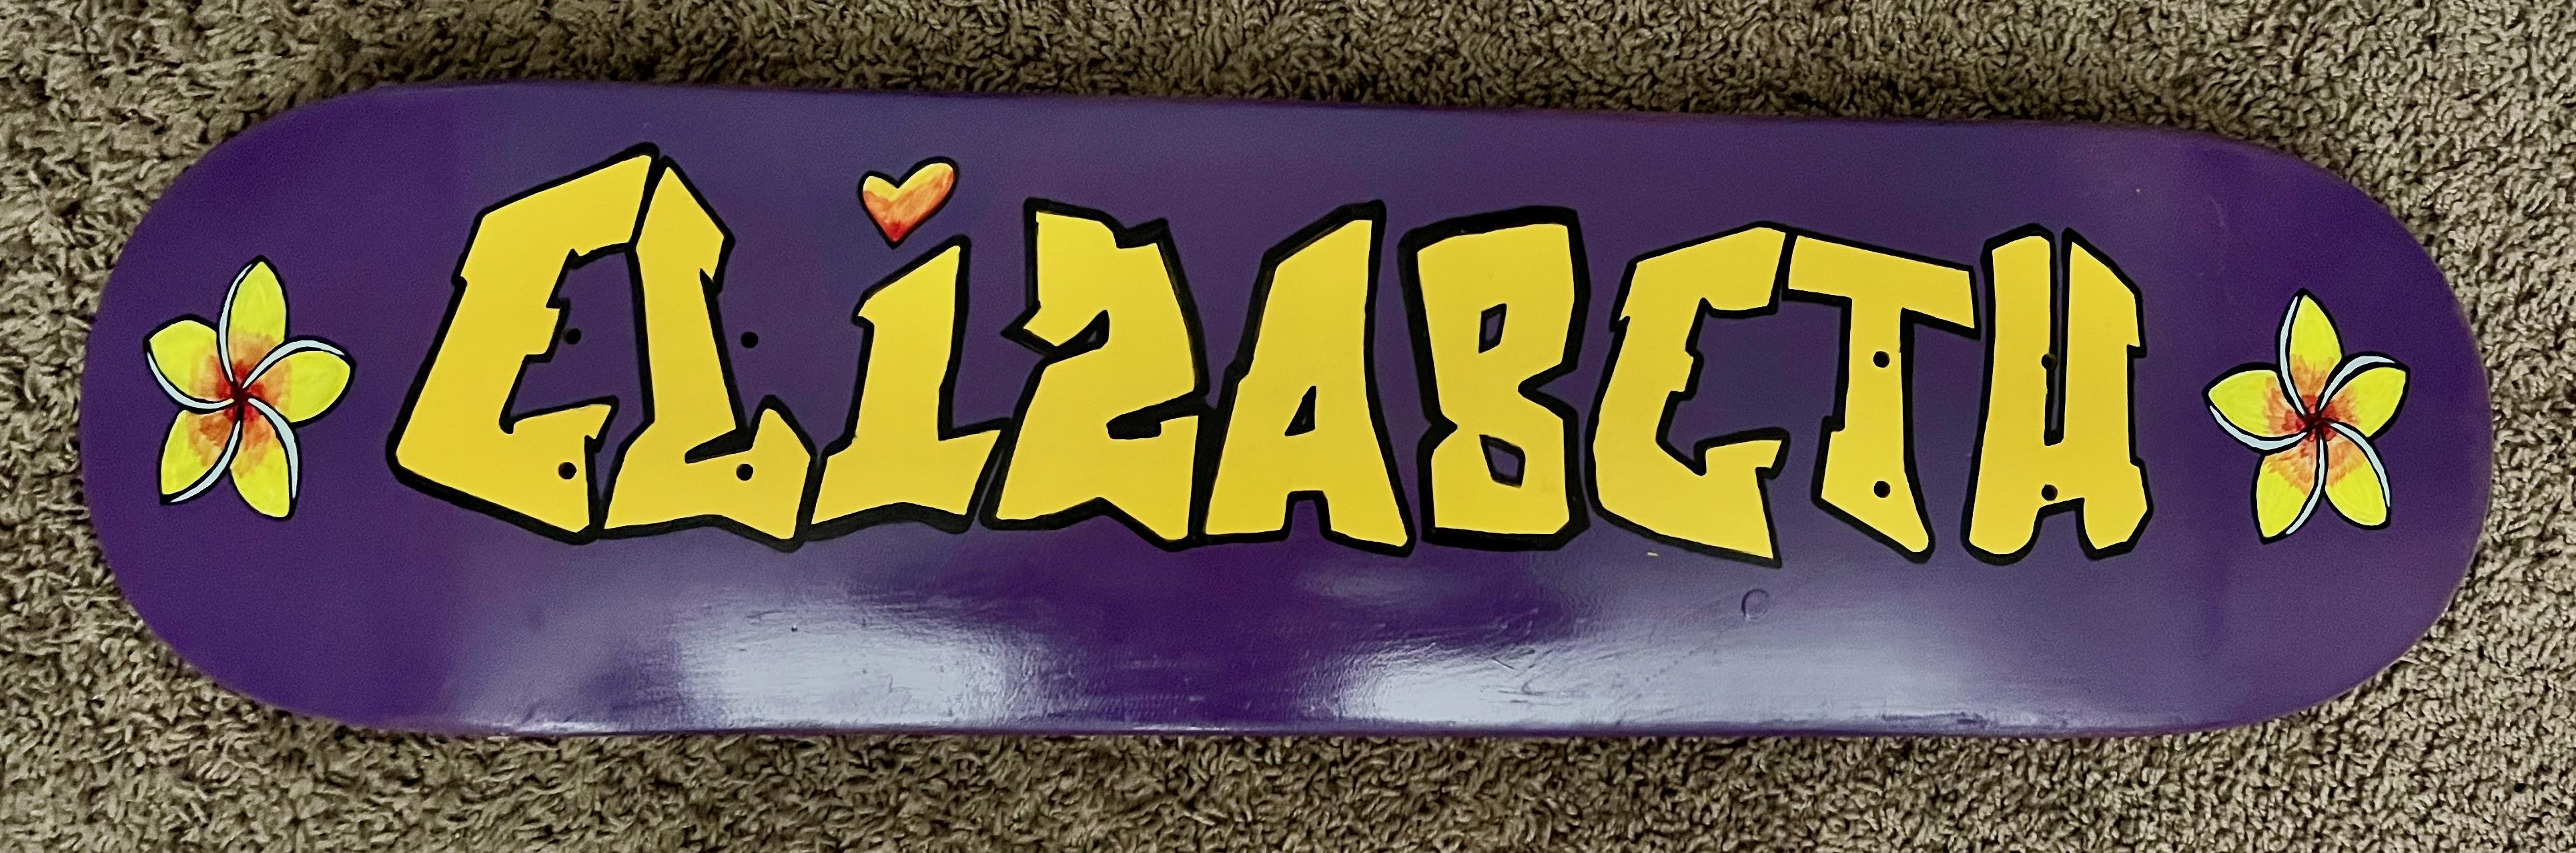 A photo of a skateboard deck with the name Elizabeth hand painted on it.